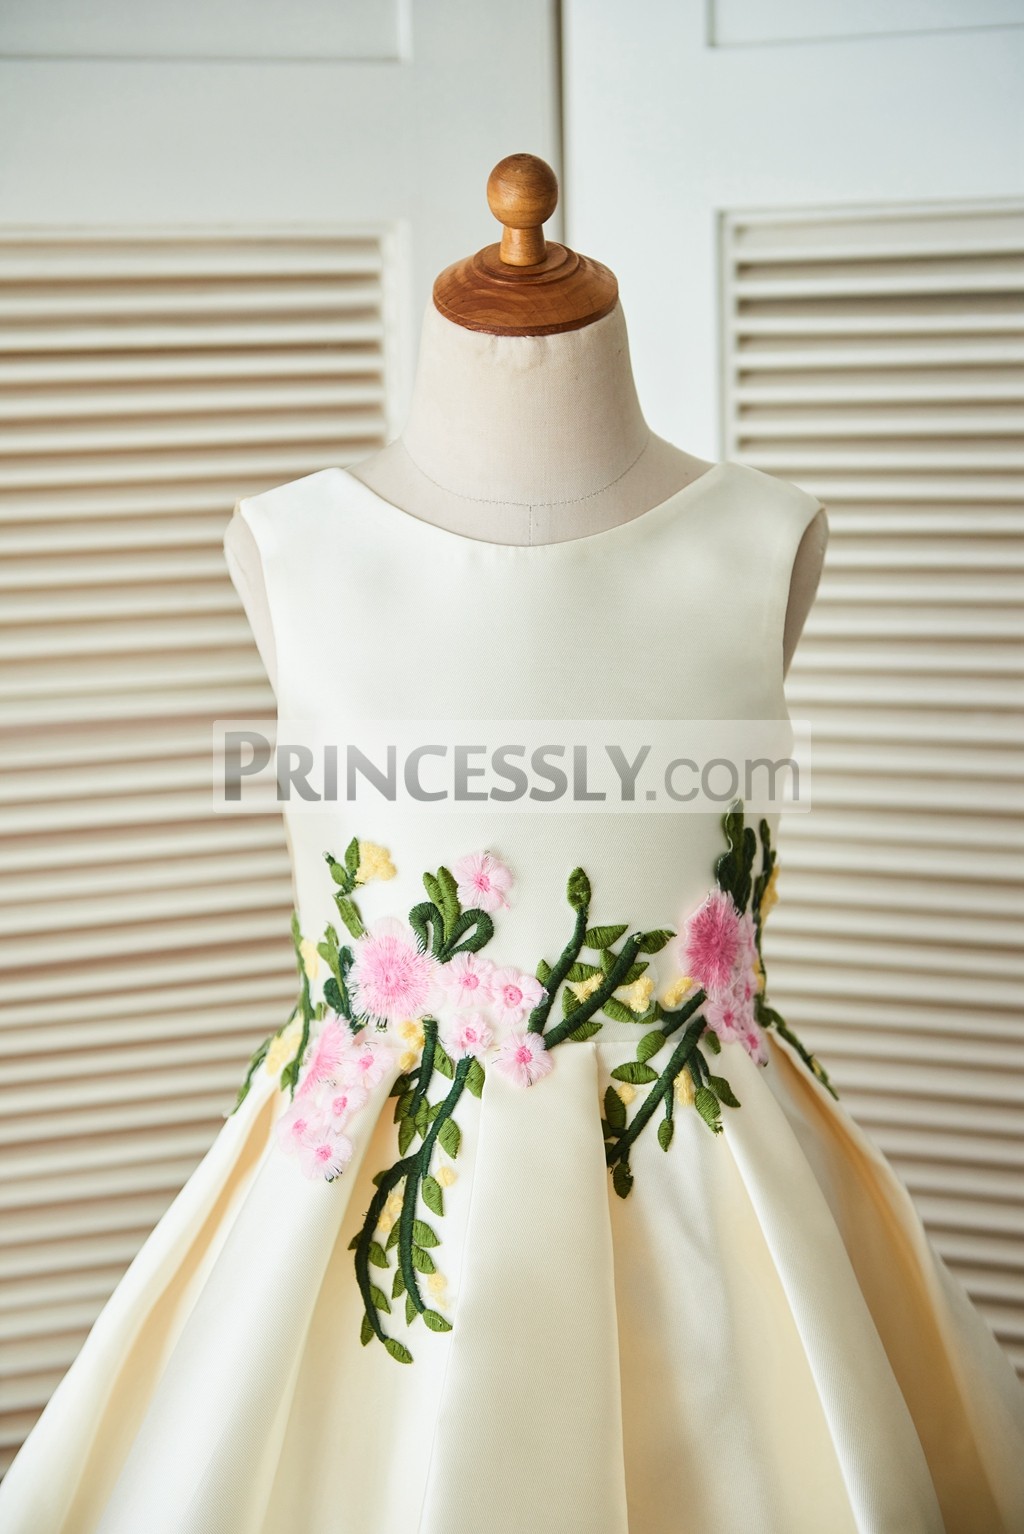 Colorful Embroidered Lace Appliques Bodice with Round & Sleeveless Style